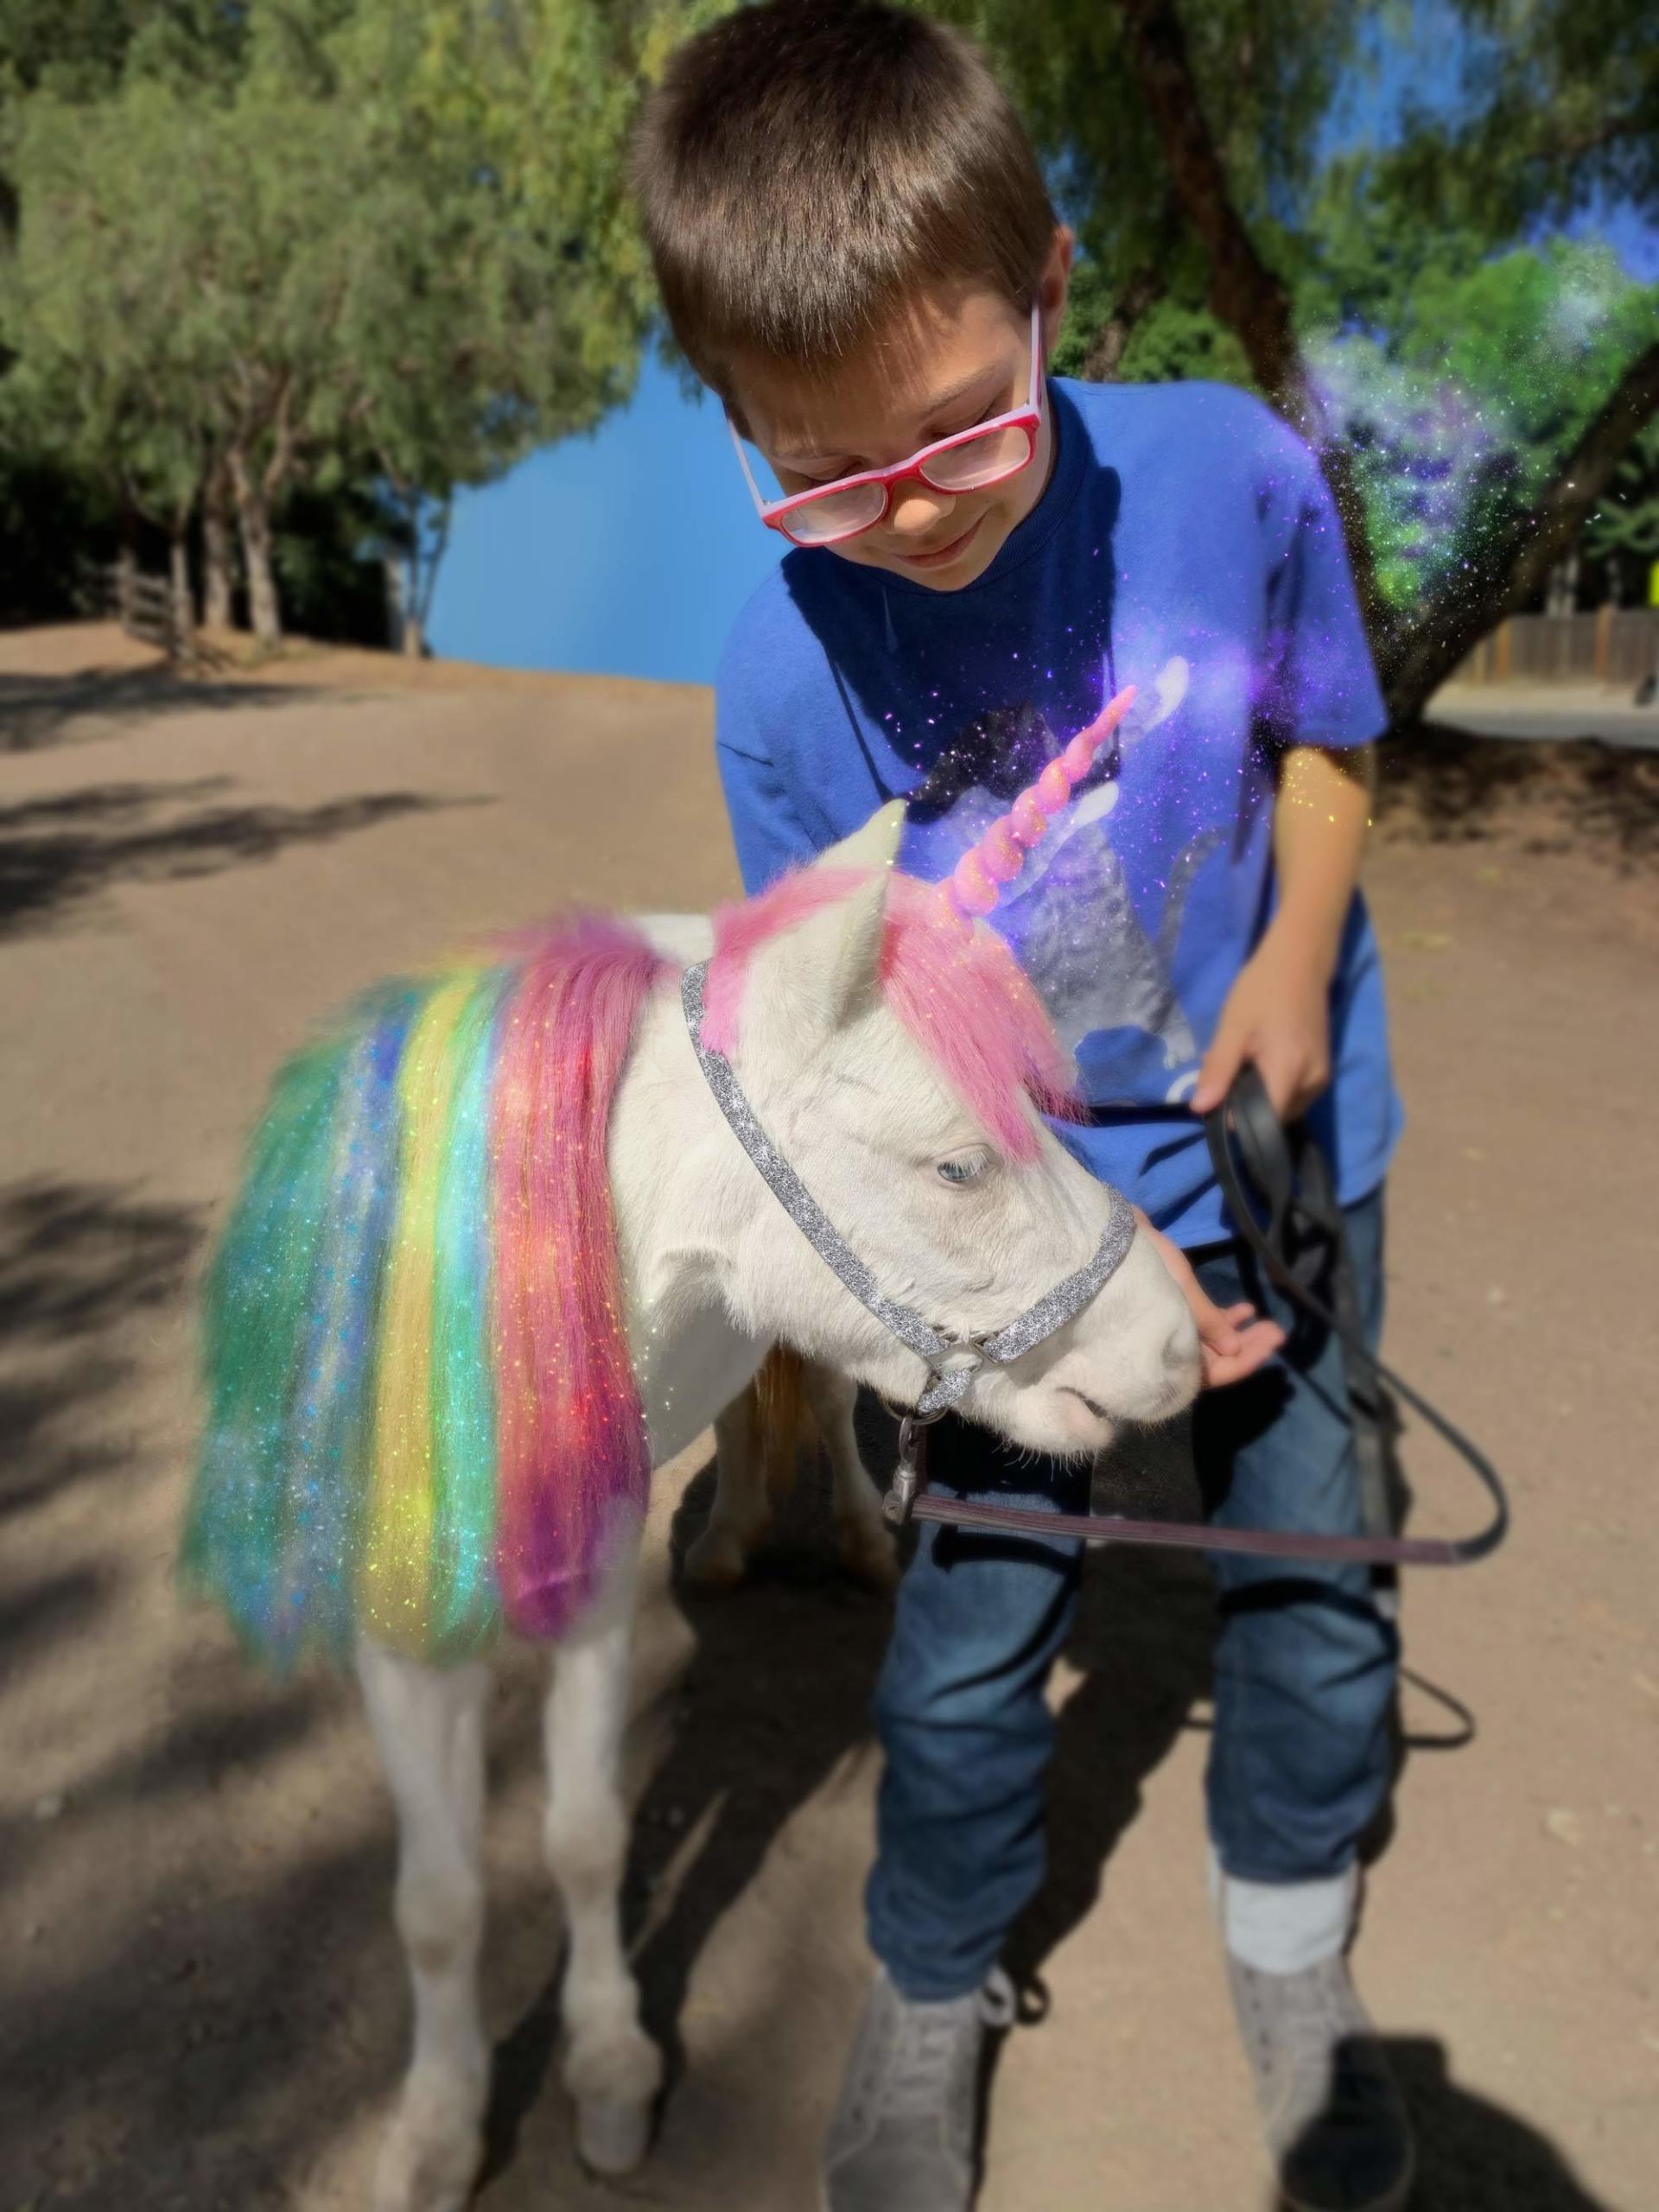 Boy with a pony that is dressed up as a unicorn.